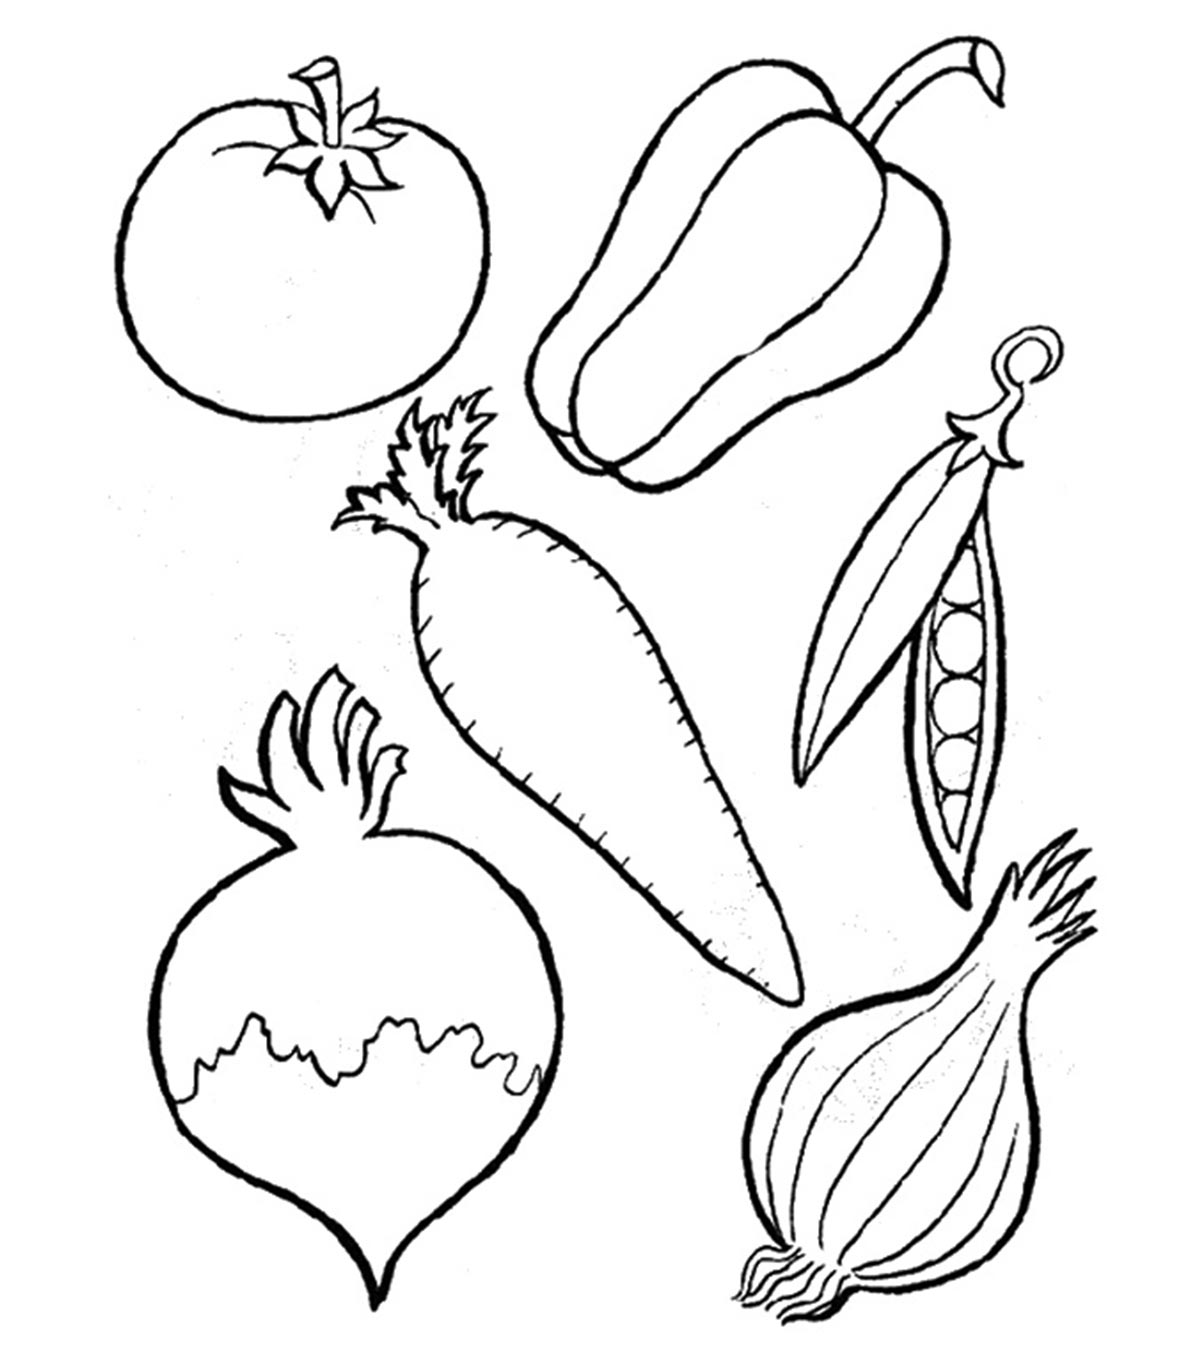 10 Vegetables Coloring Pages For Your Toddler_image